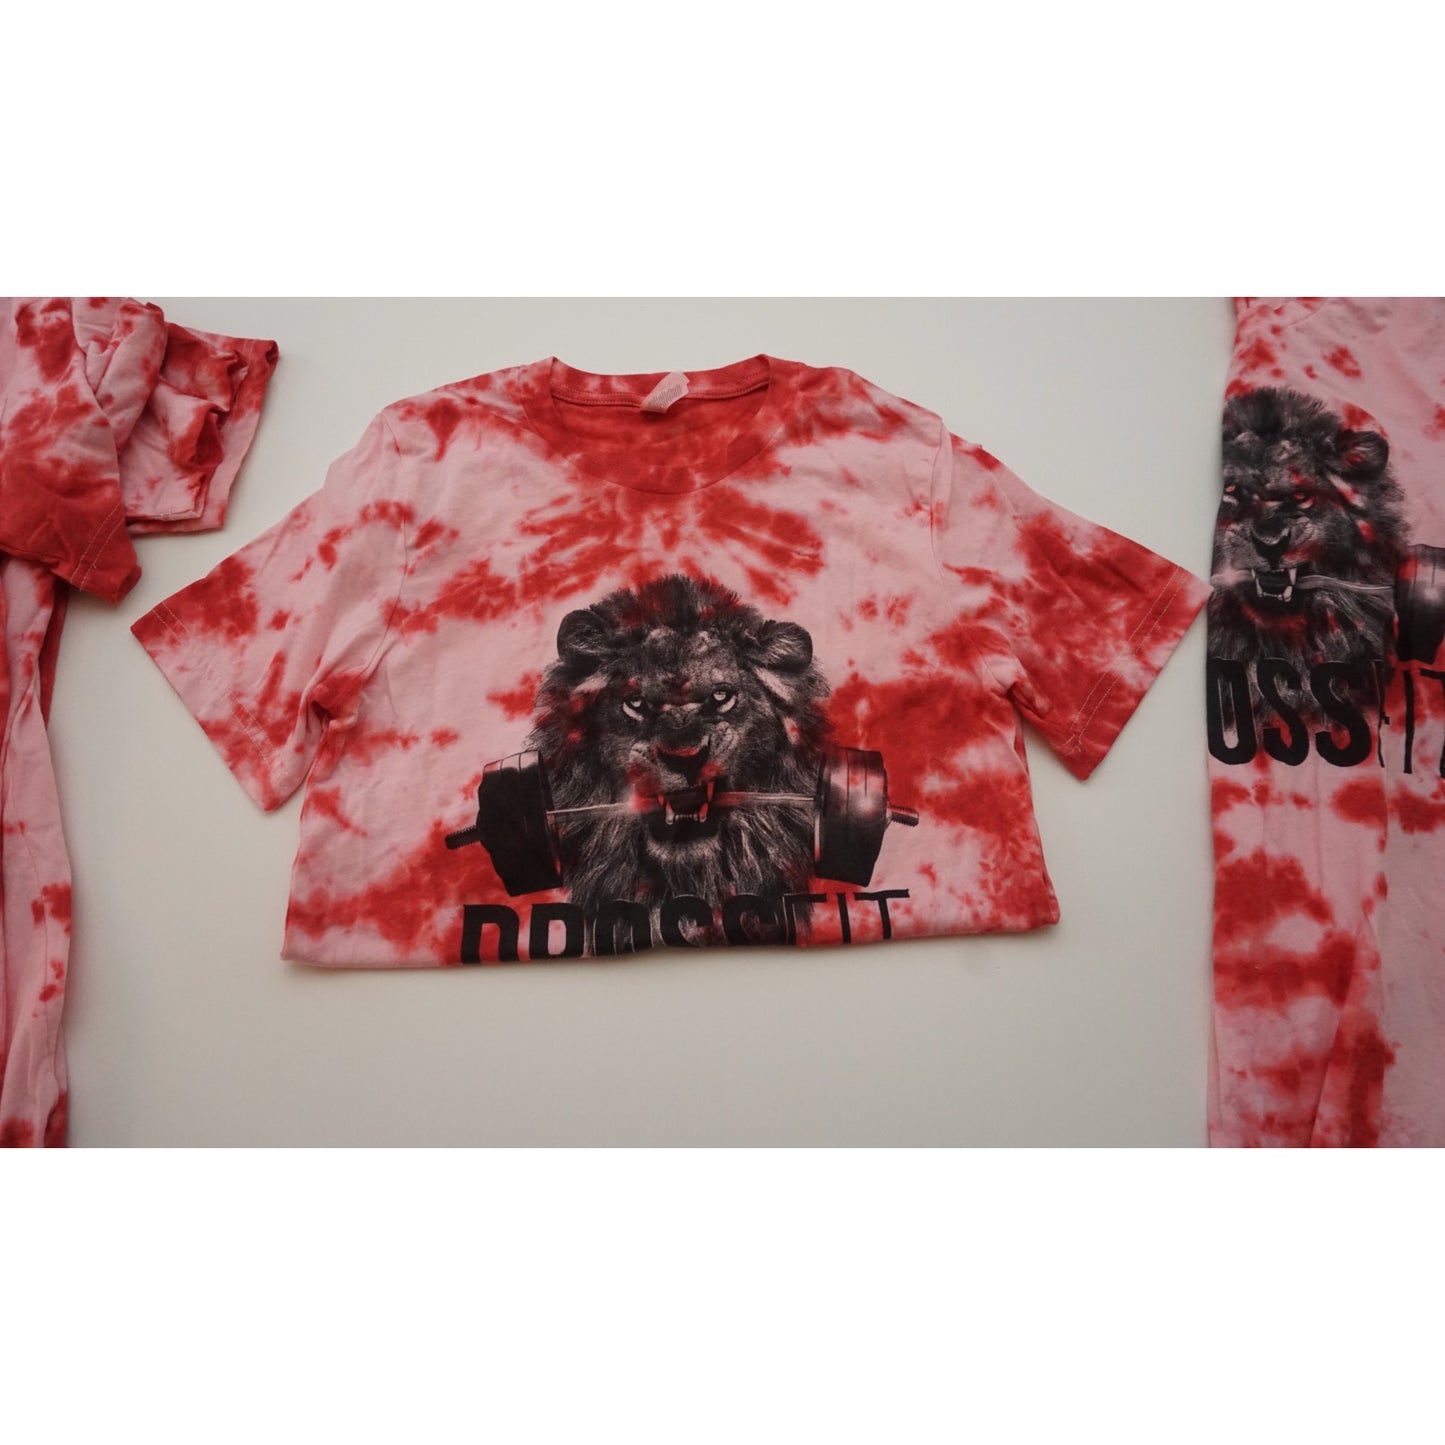 DROSSFIT Logo. Hand tie-dyed red t-shirt